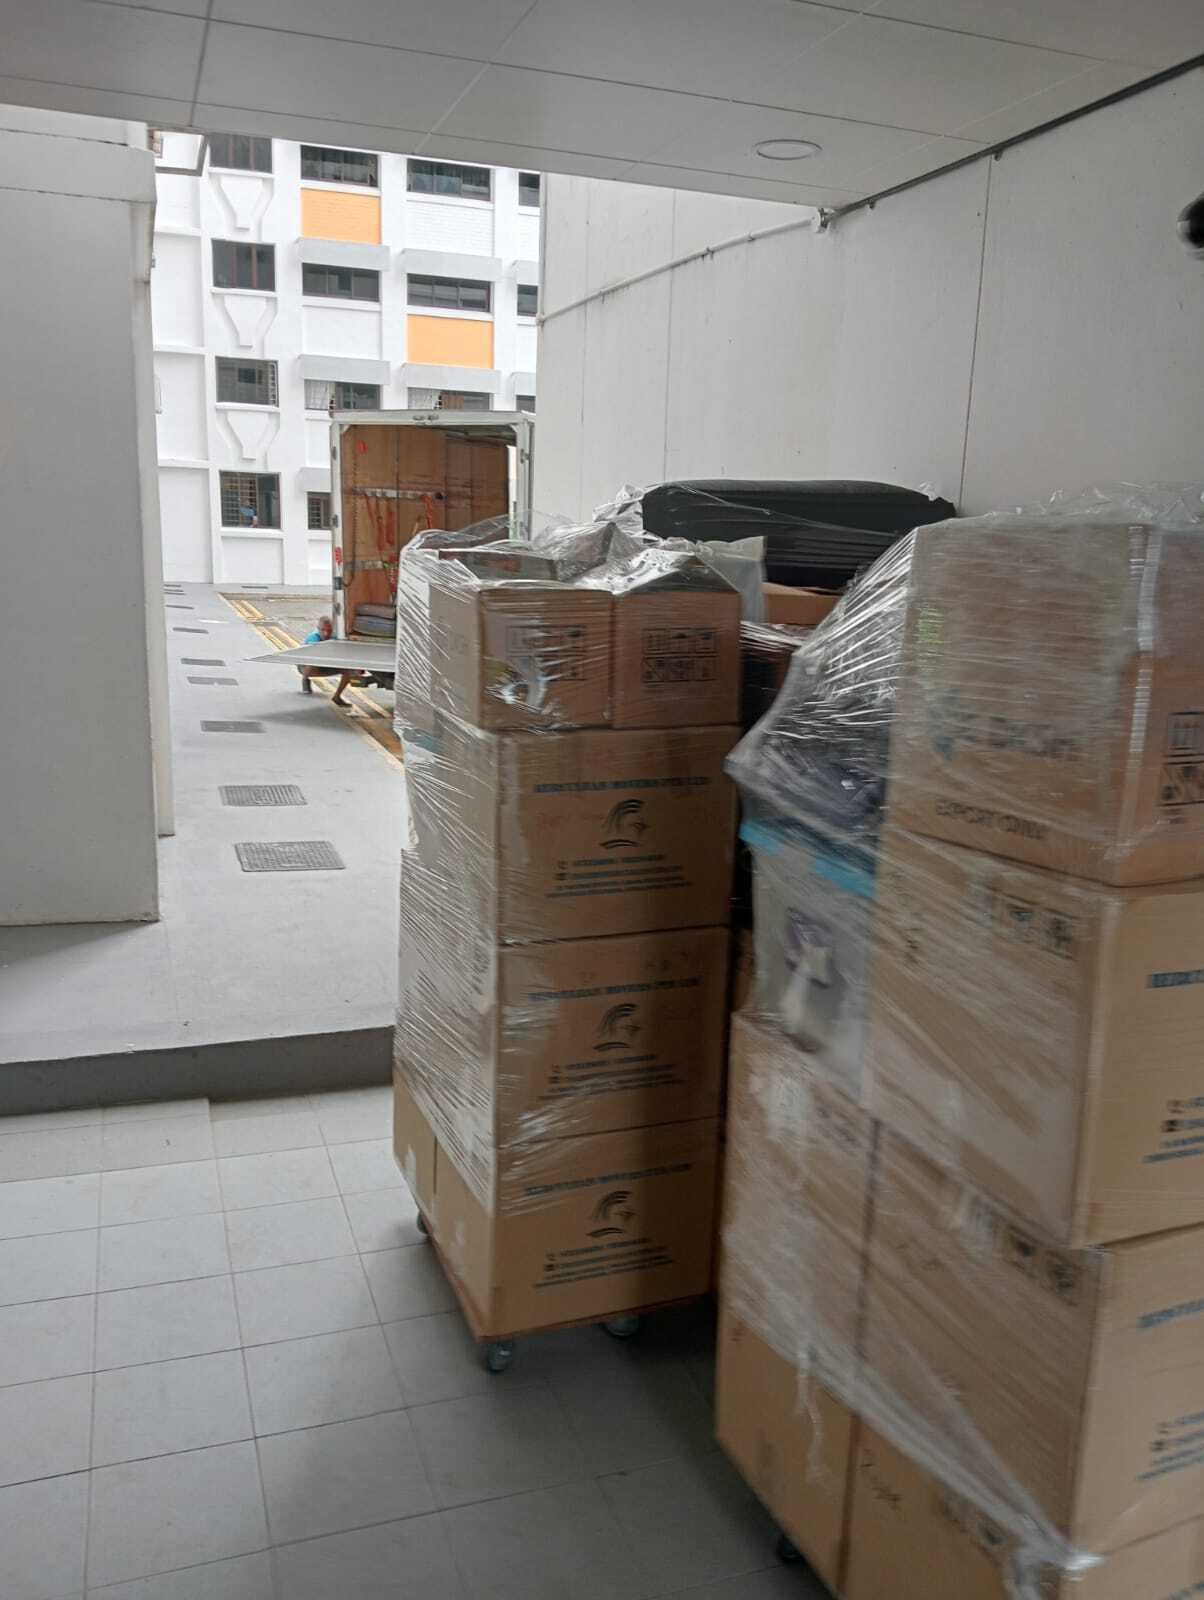 boxes on trolley in hallway